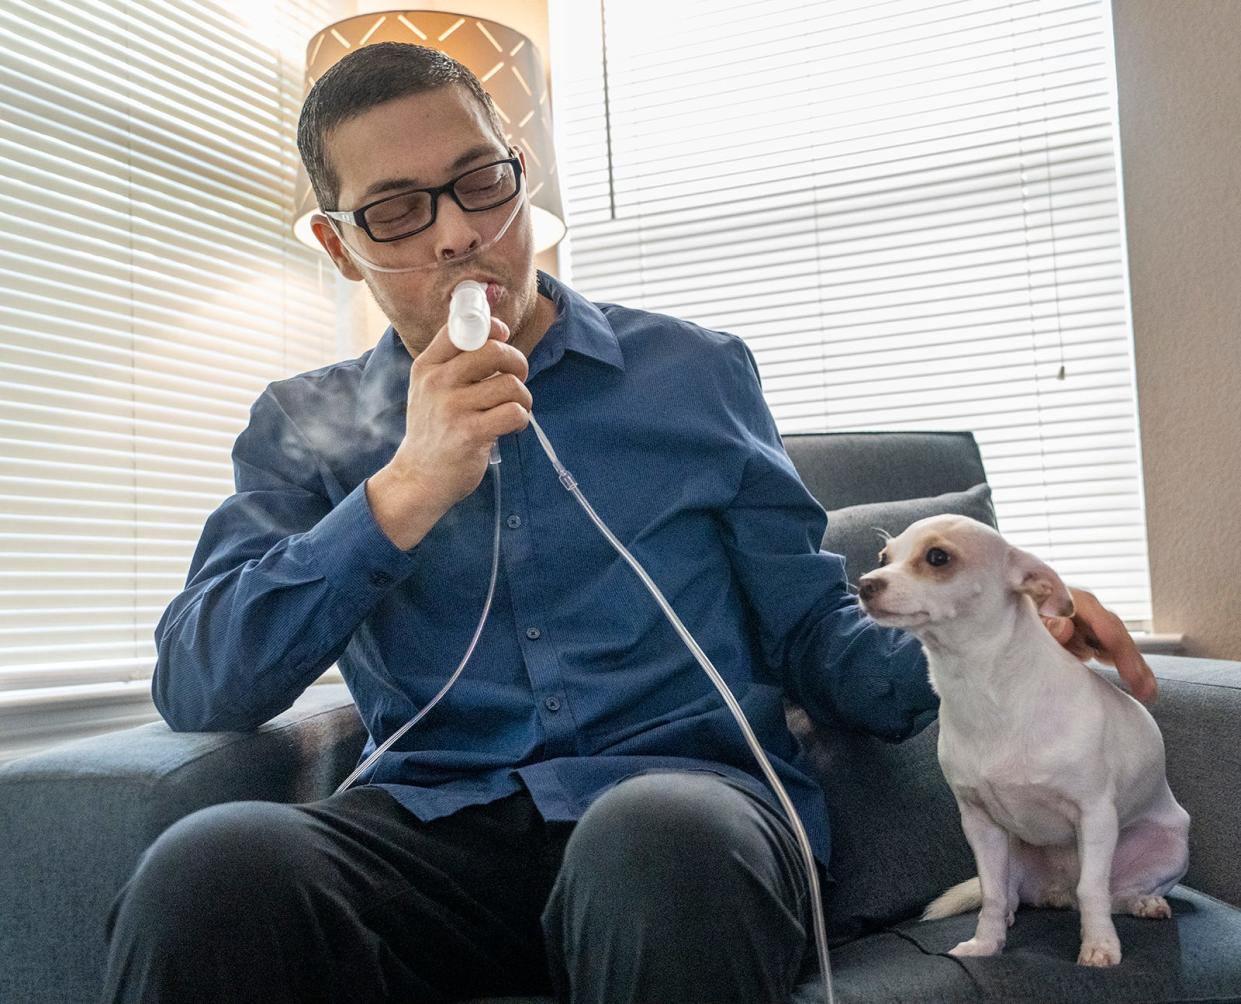 Charles Richard uses his nebulizer sitting beside his dog Chulita. Charles has been diagnosed with stage IV lung cancer and is in treatment, but he hopes to one day return to working. His wife has become his full-time caregiver.